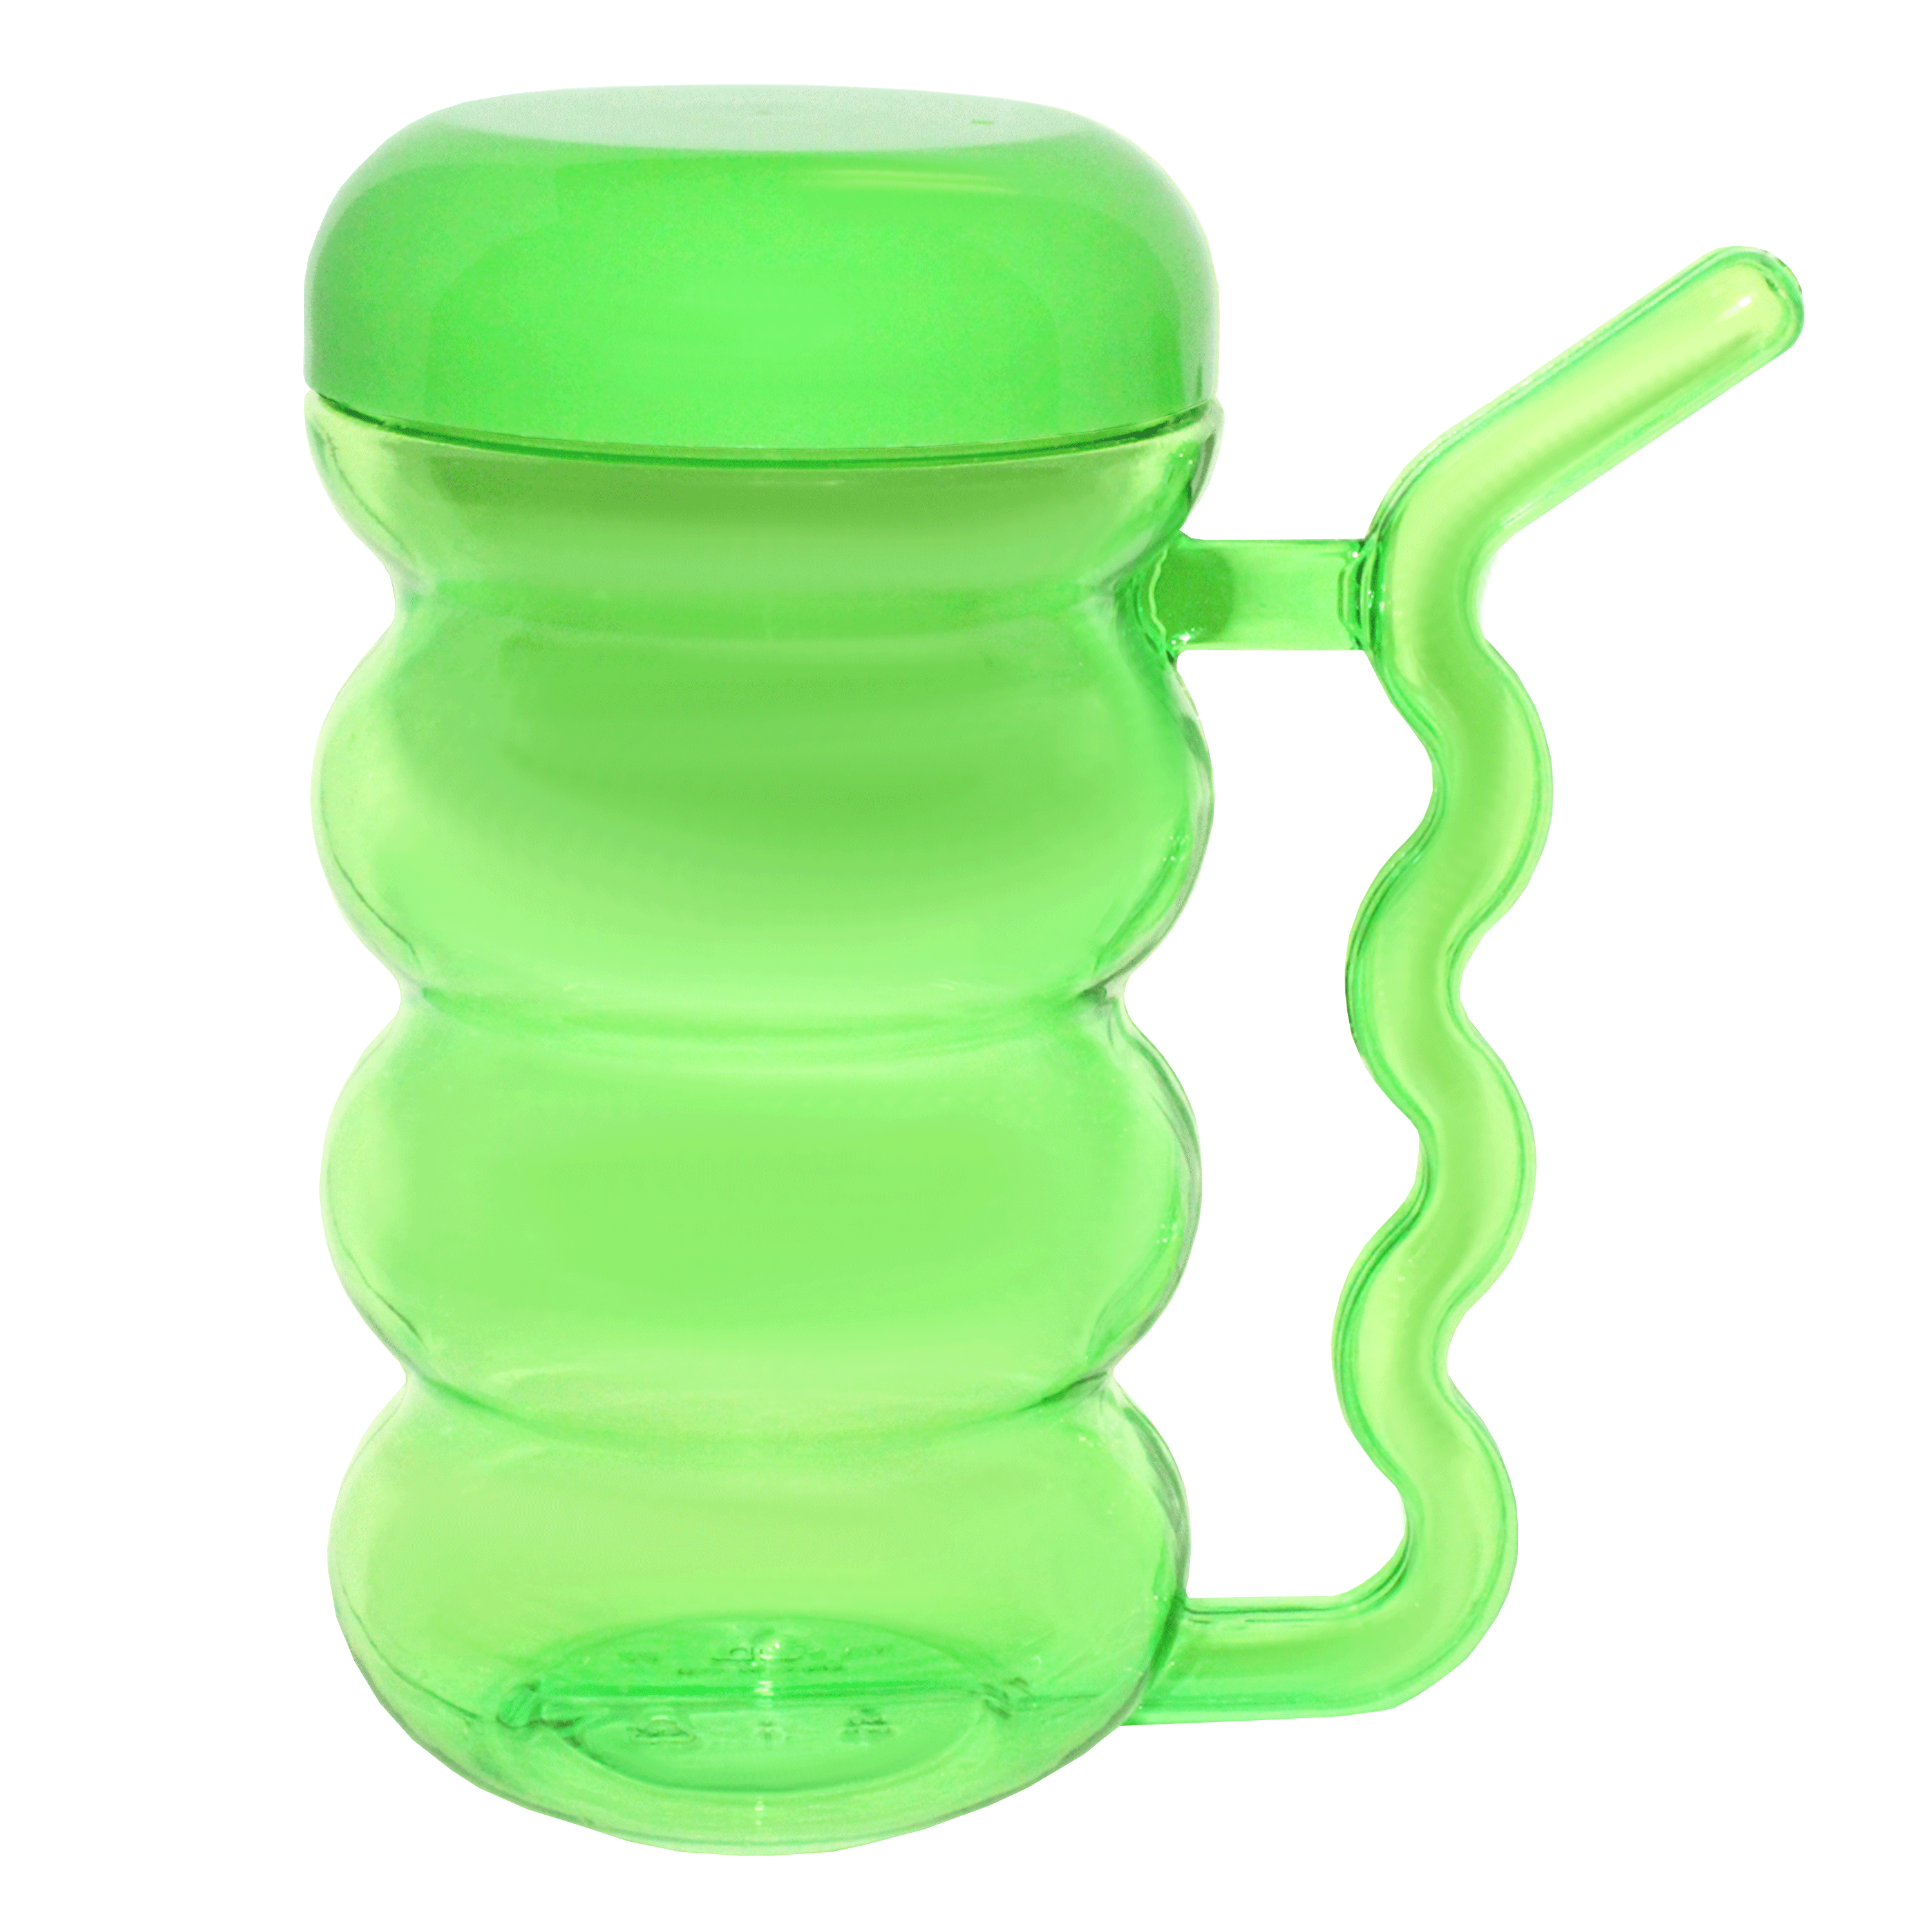 https://rehabilitationadvantage.com/wp-content/uploads/2019/05/Cup-with-built-in-straw.png